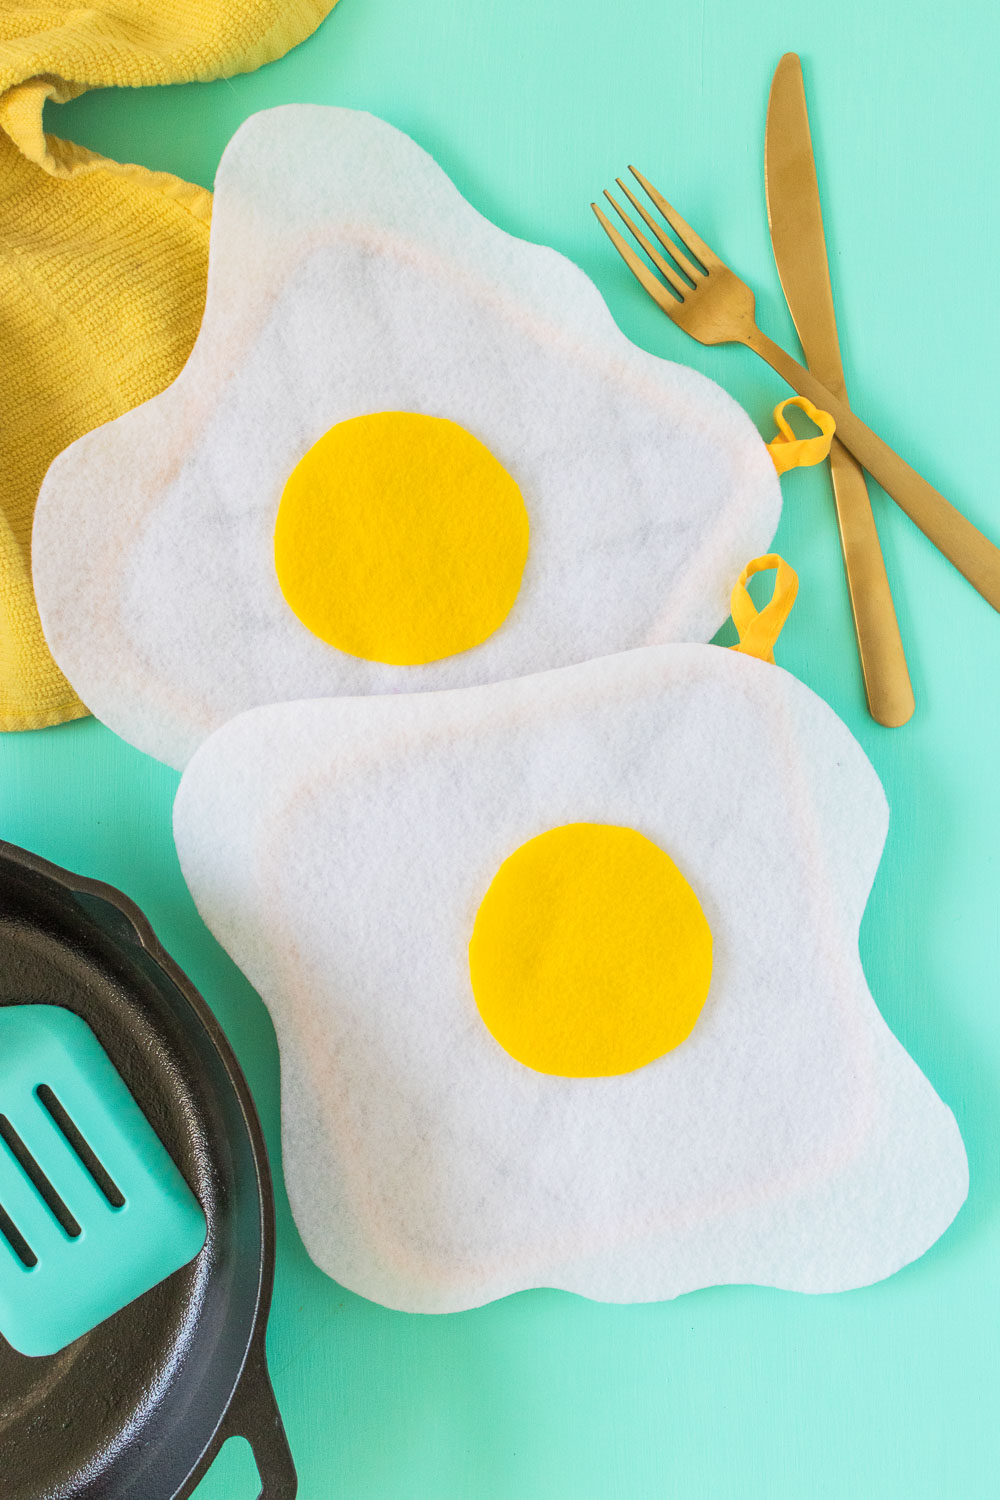 DIY No-Sew Fried Egg Oven Mitts [+ a Video!] | Club Crafted